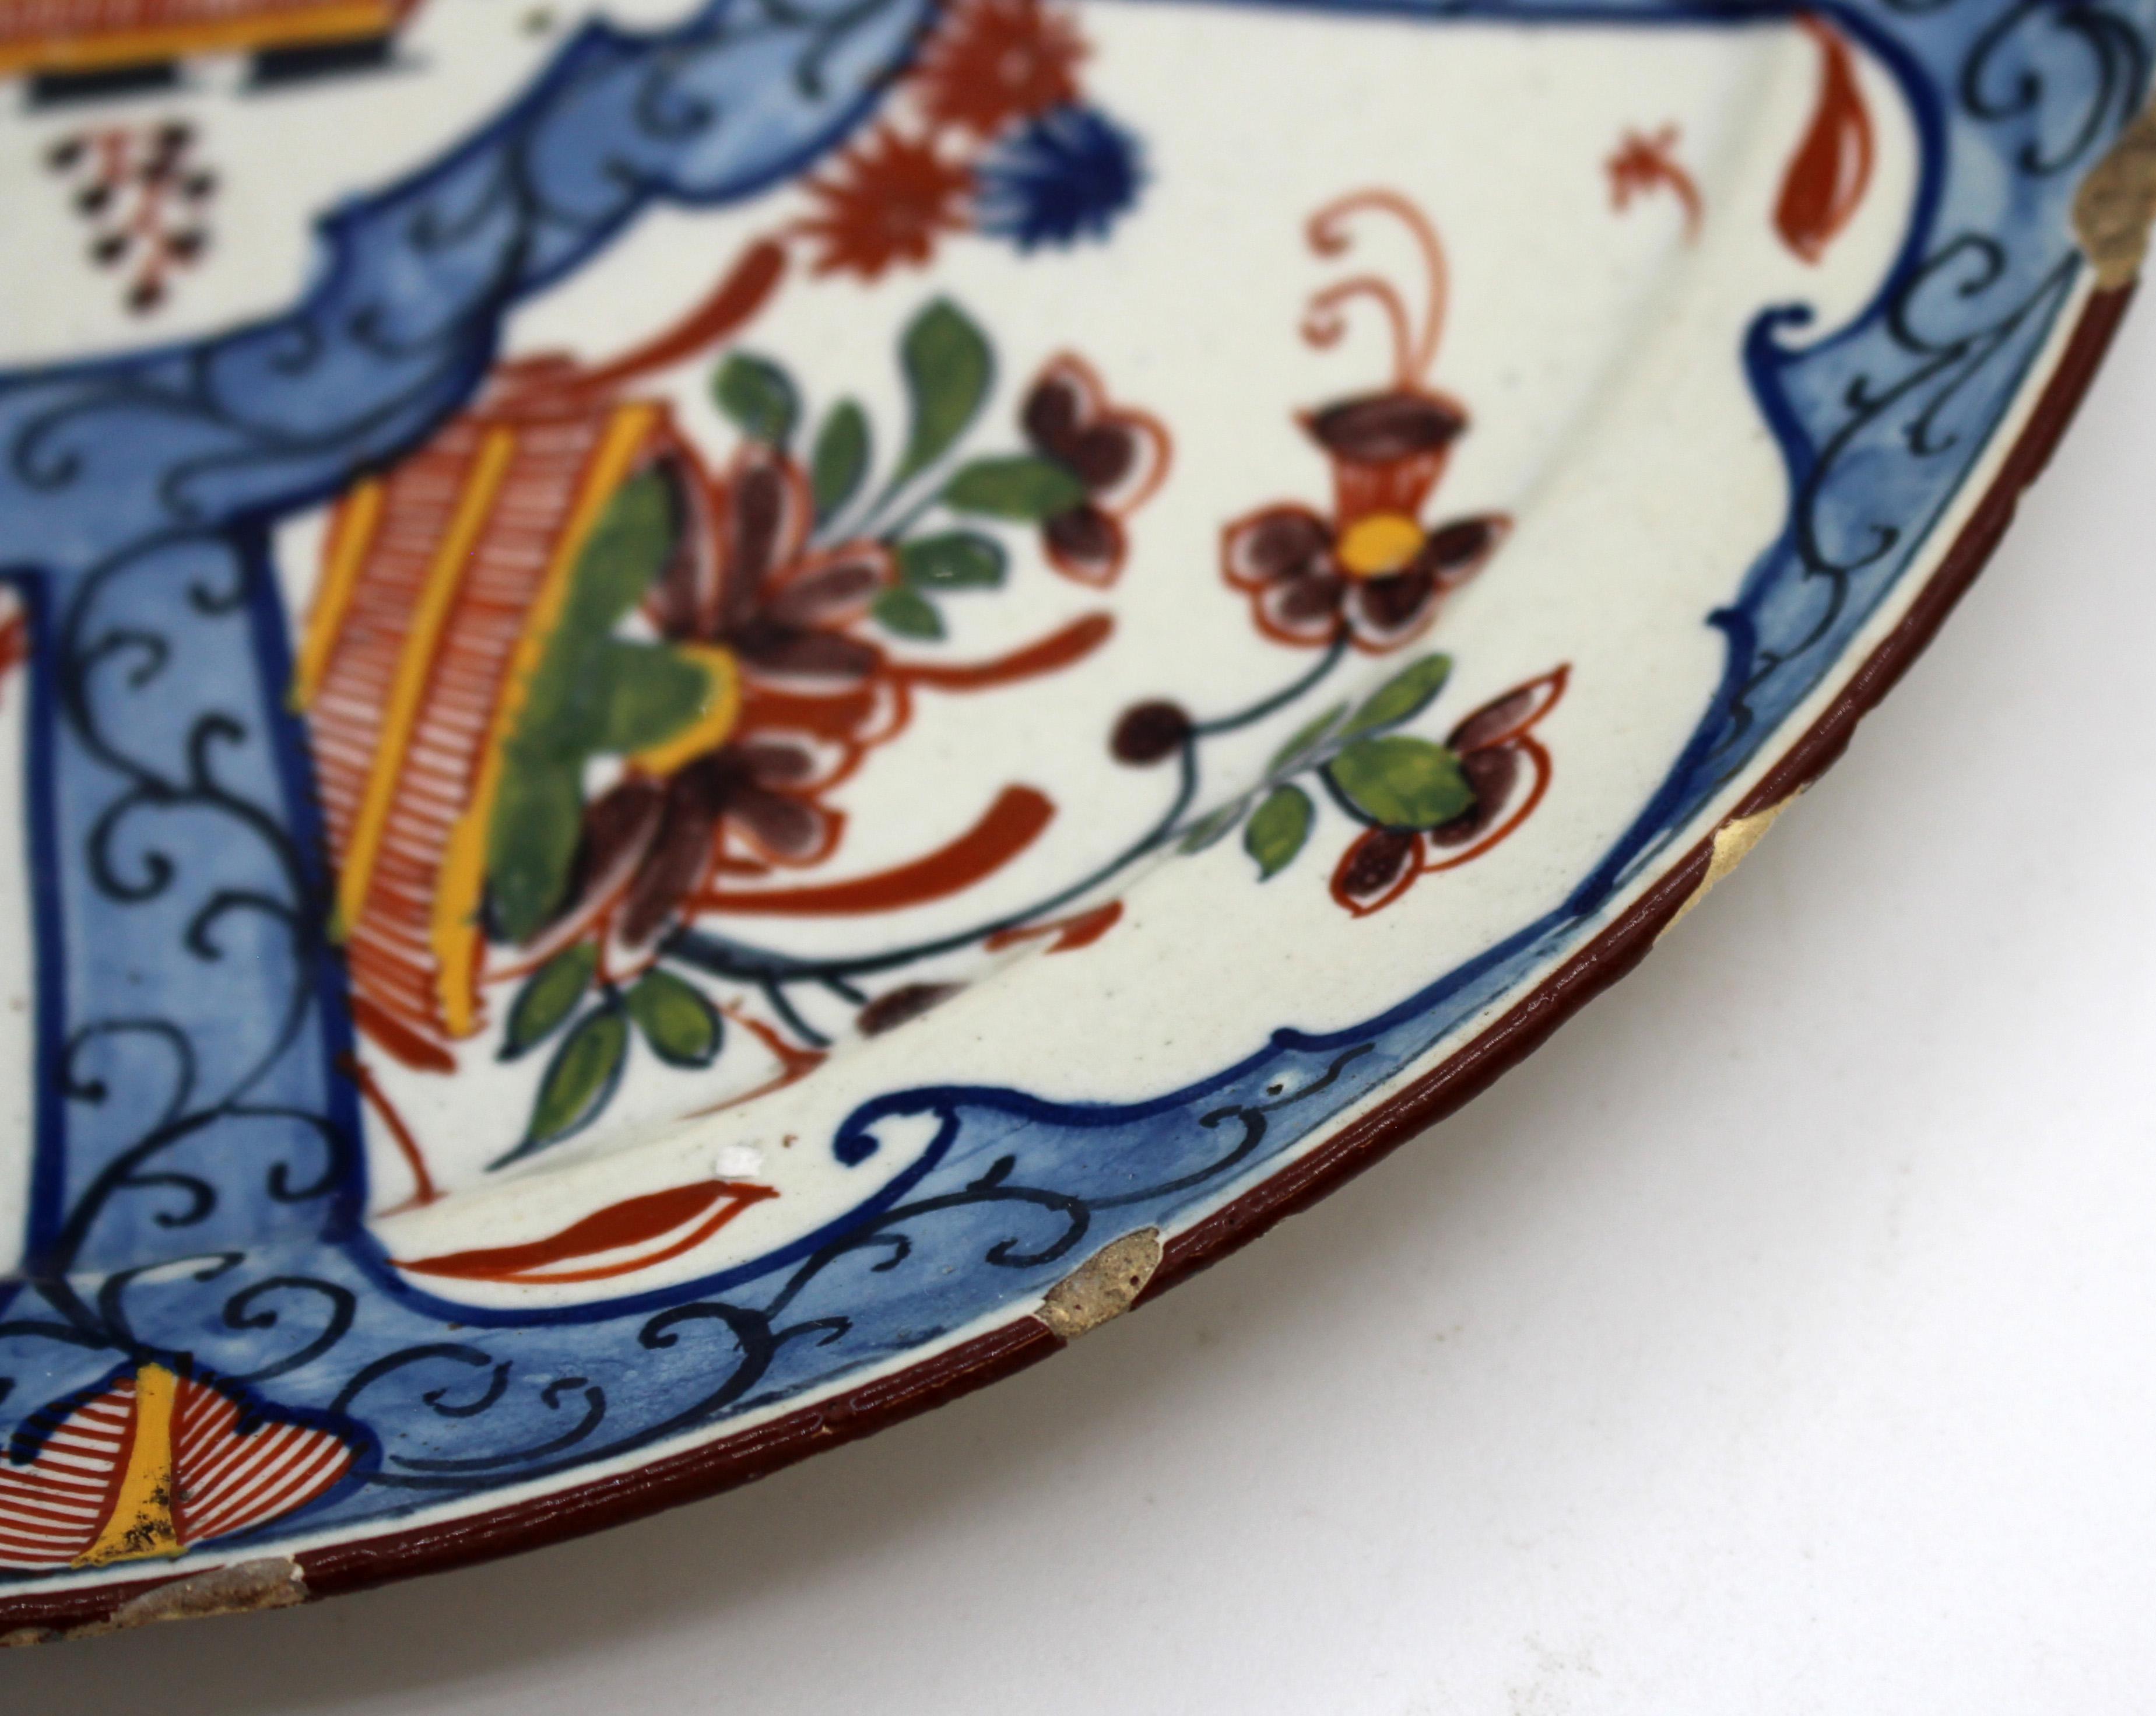 Circa 1770 Delft polychrome plate. Very well decorated with central shaped medallion of a basket of flowers surrounded by 5 shaped panels of flowers baskets. Maker's mark en verso. 4.5